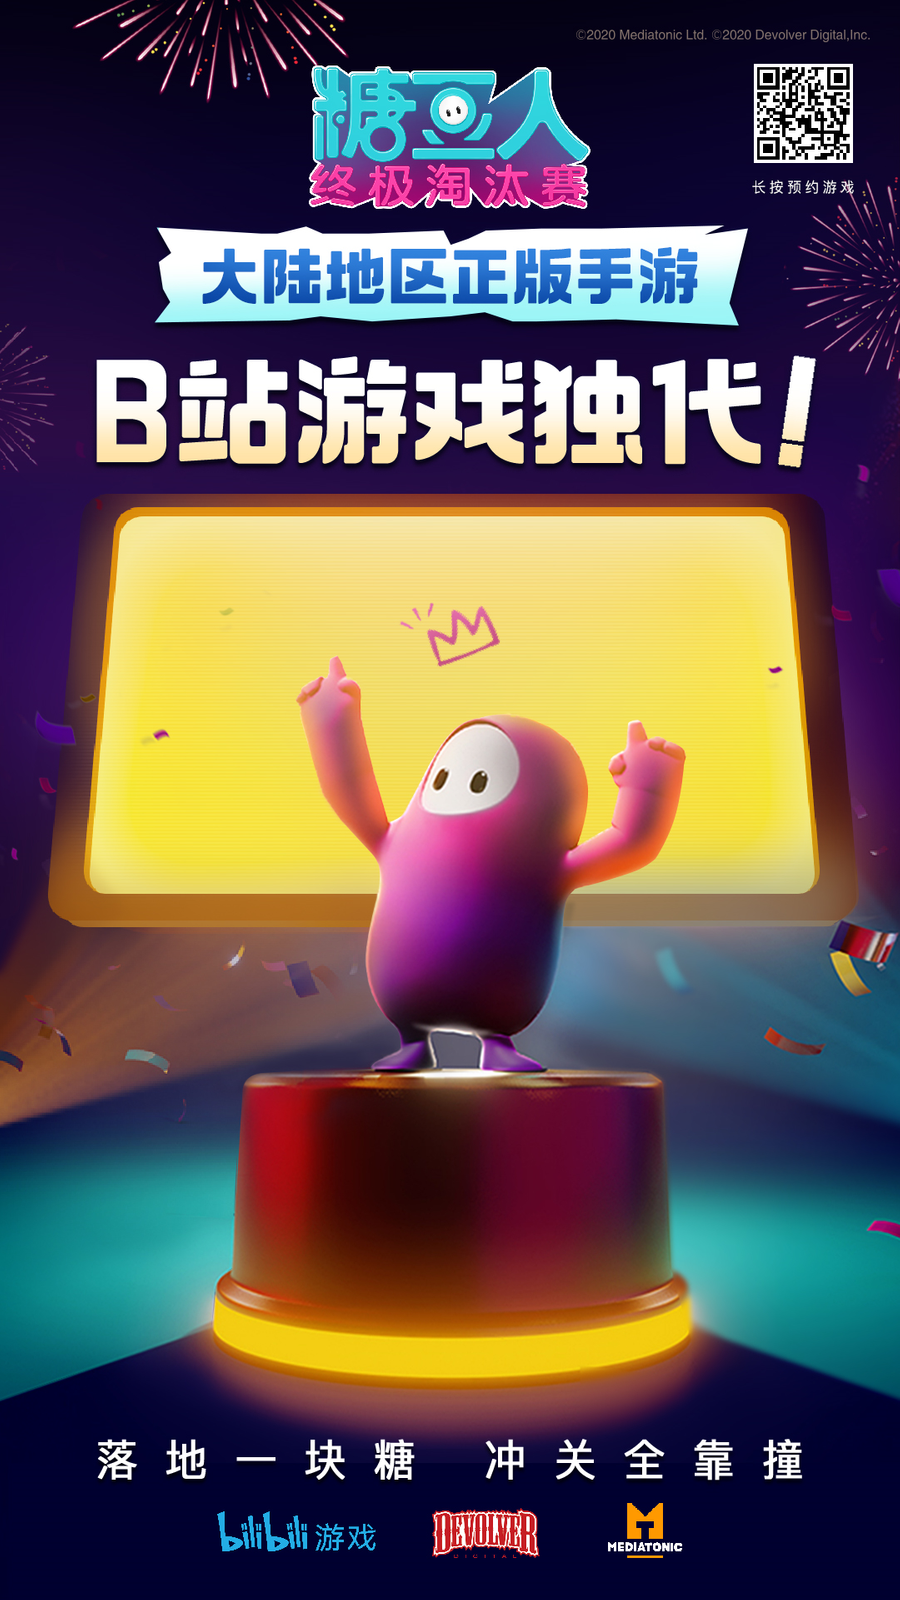 Bilibili to Publish a Mobile Version of Fall Guys with Custom